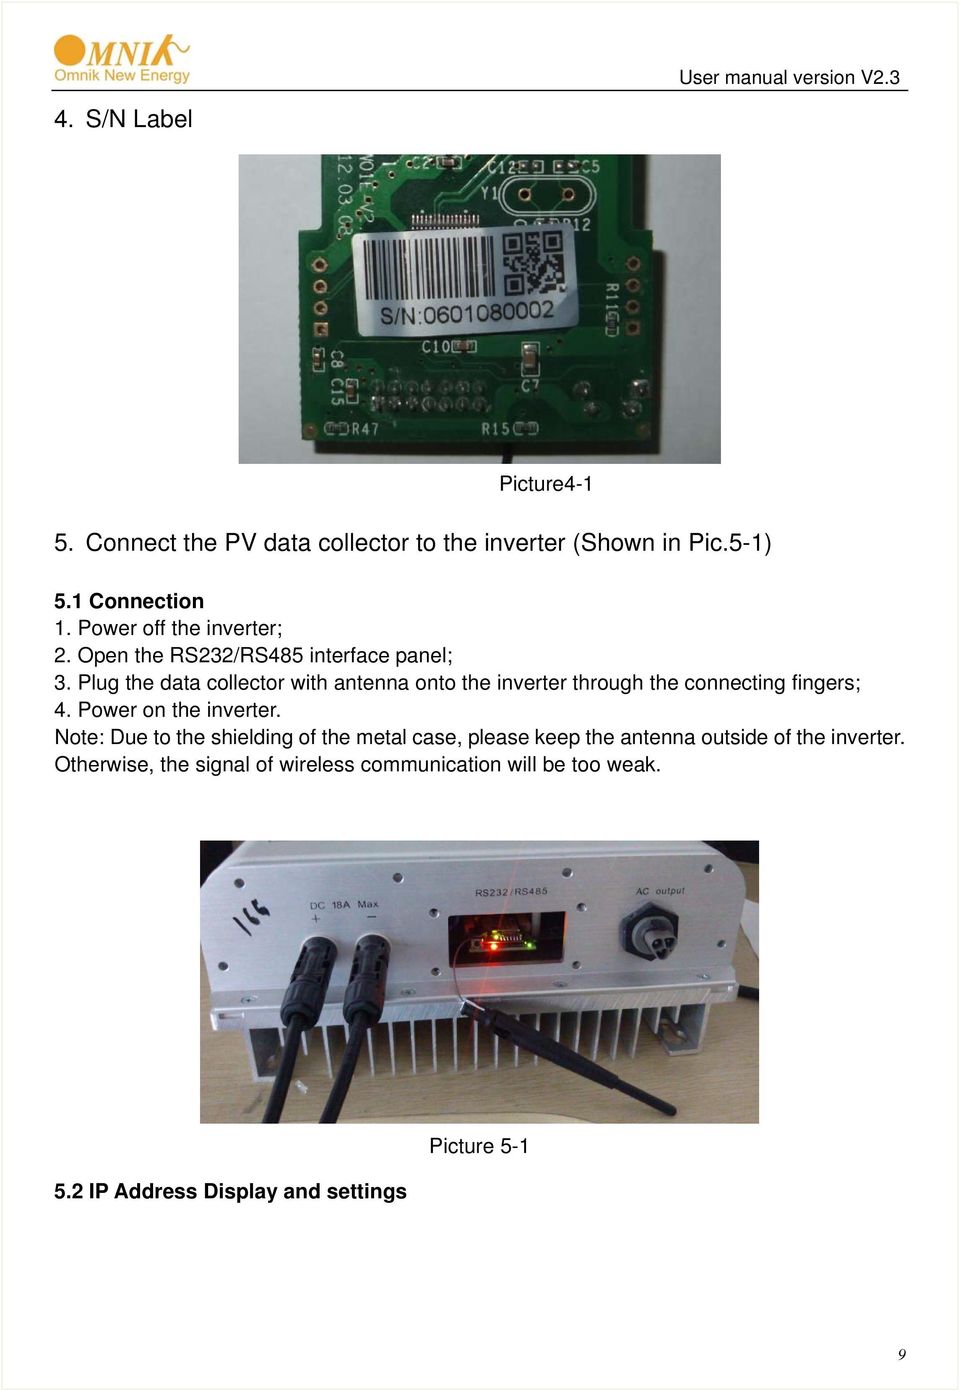 Plug the data collector with antenna onto the inverter through the connecting fingers; 4. Power on the inverter.